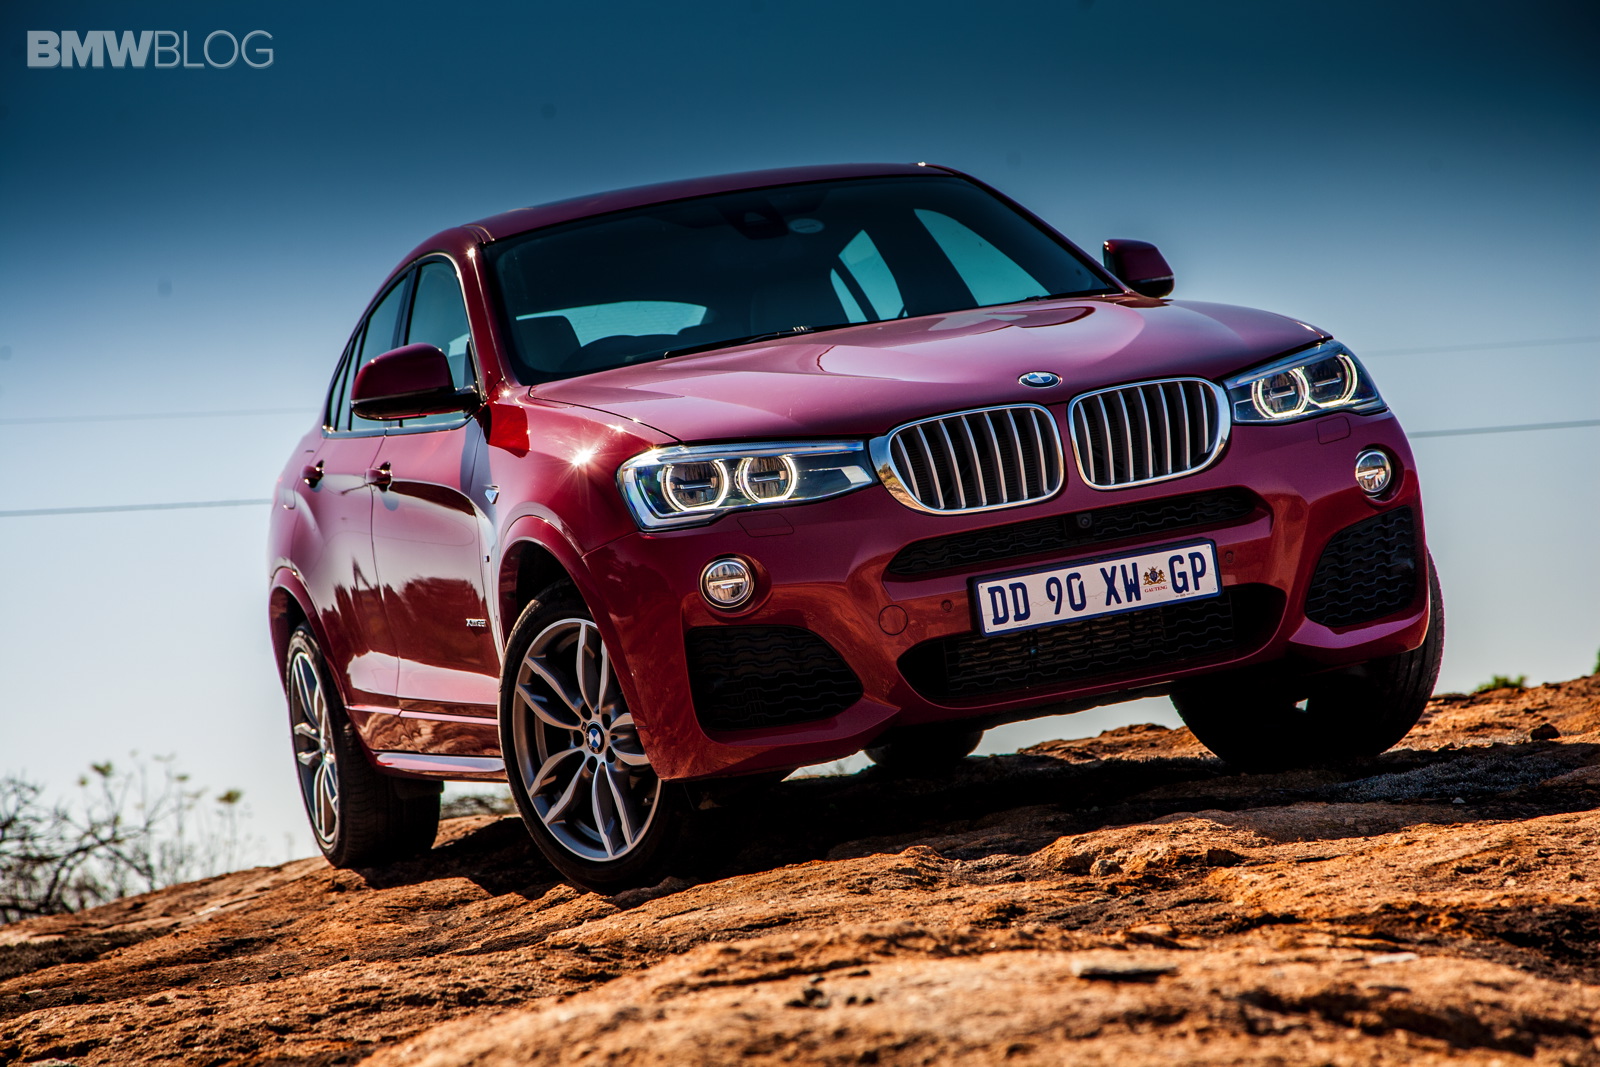 PHOTO GALLERY: BMW X4 xDrive35i M Sport Package in Melbourne Red